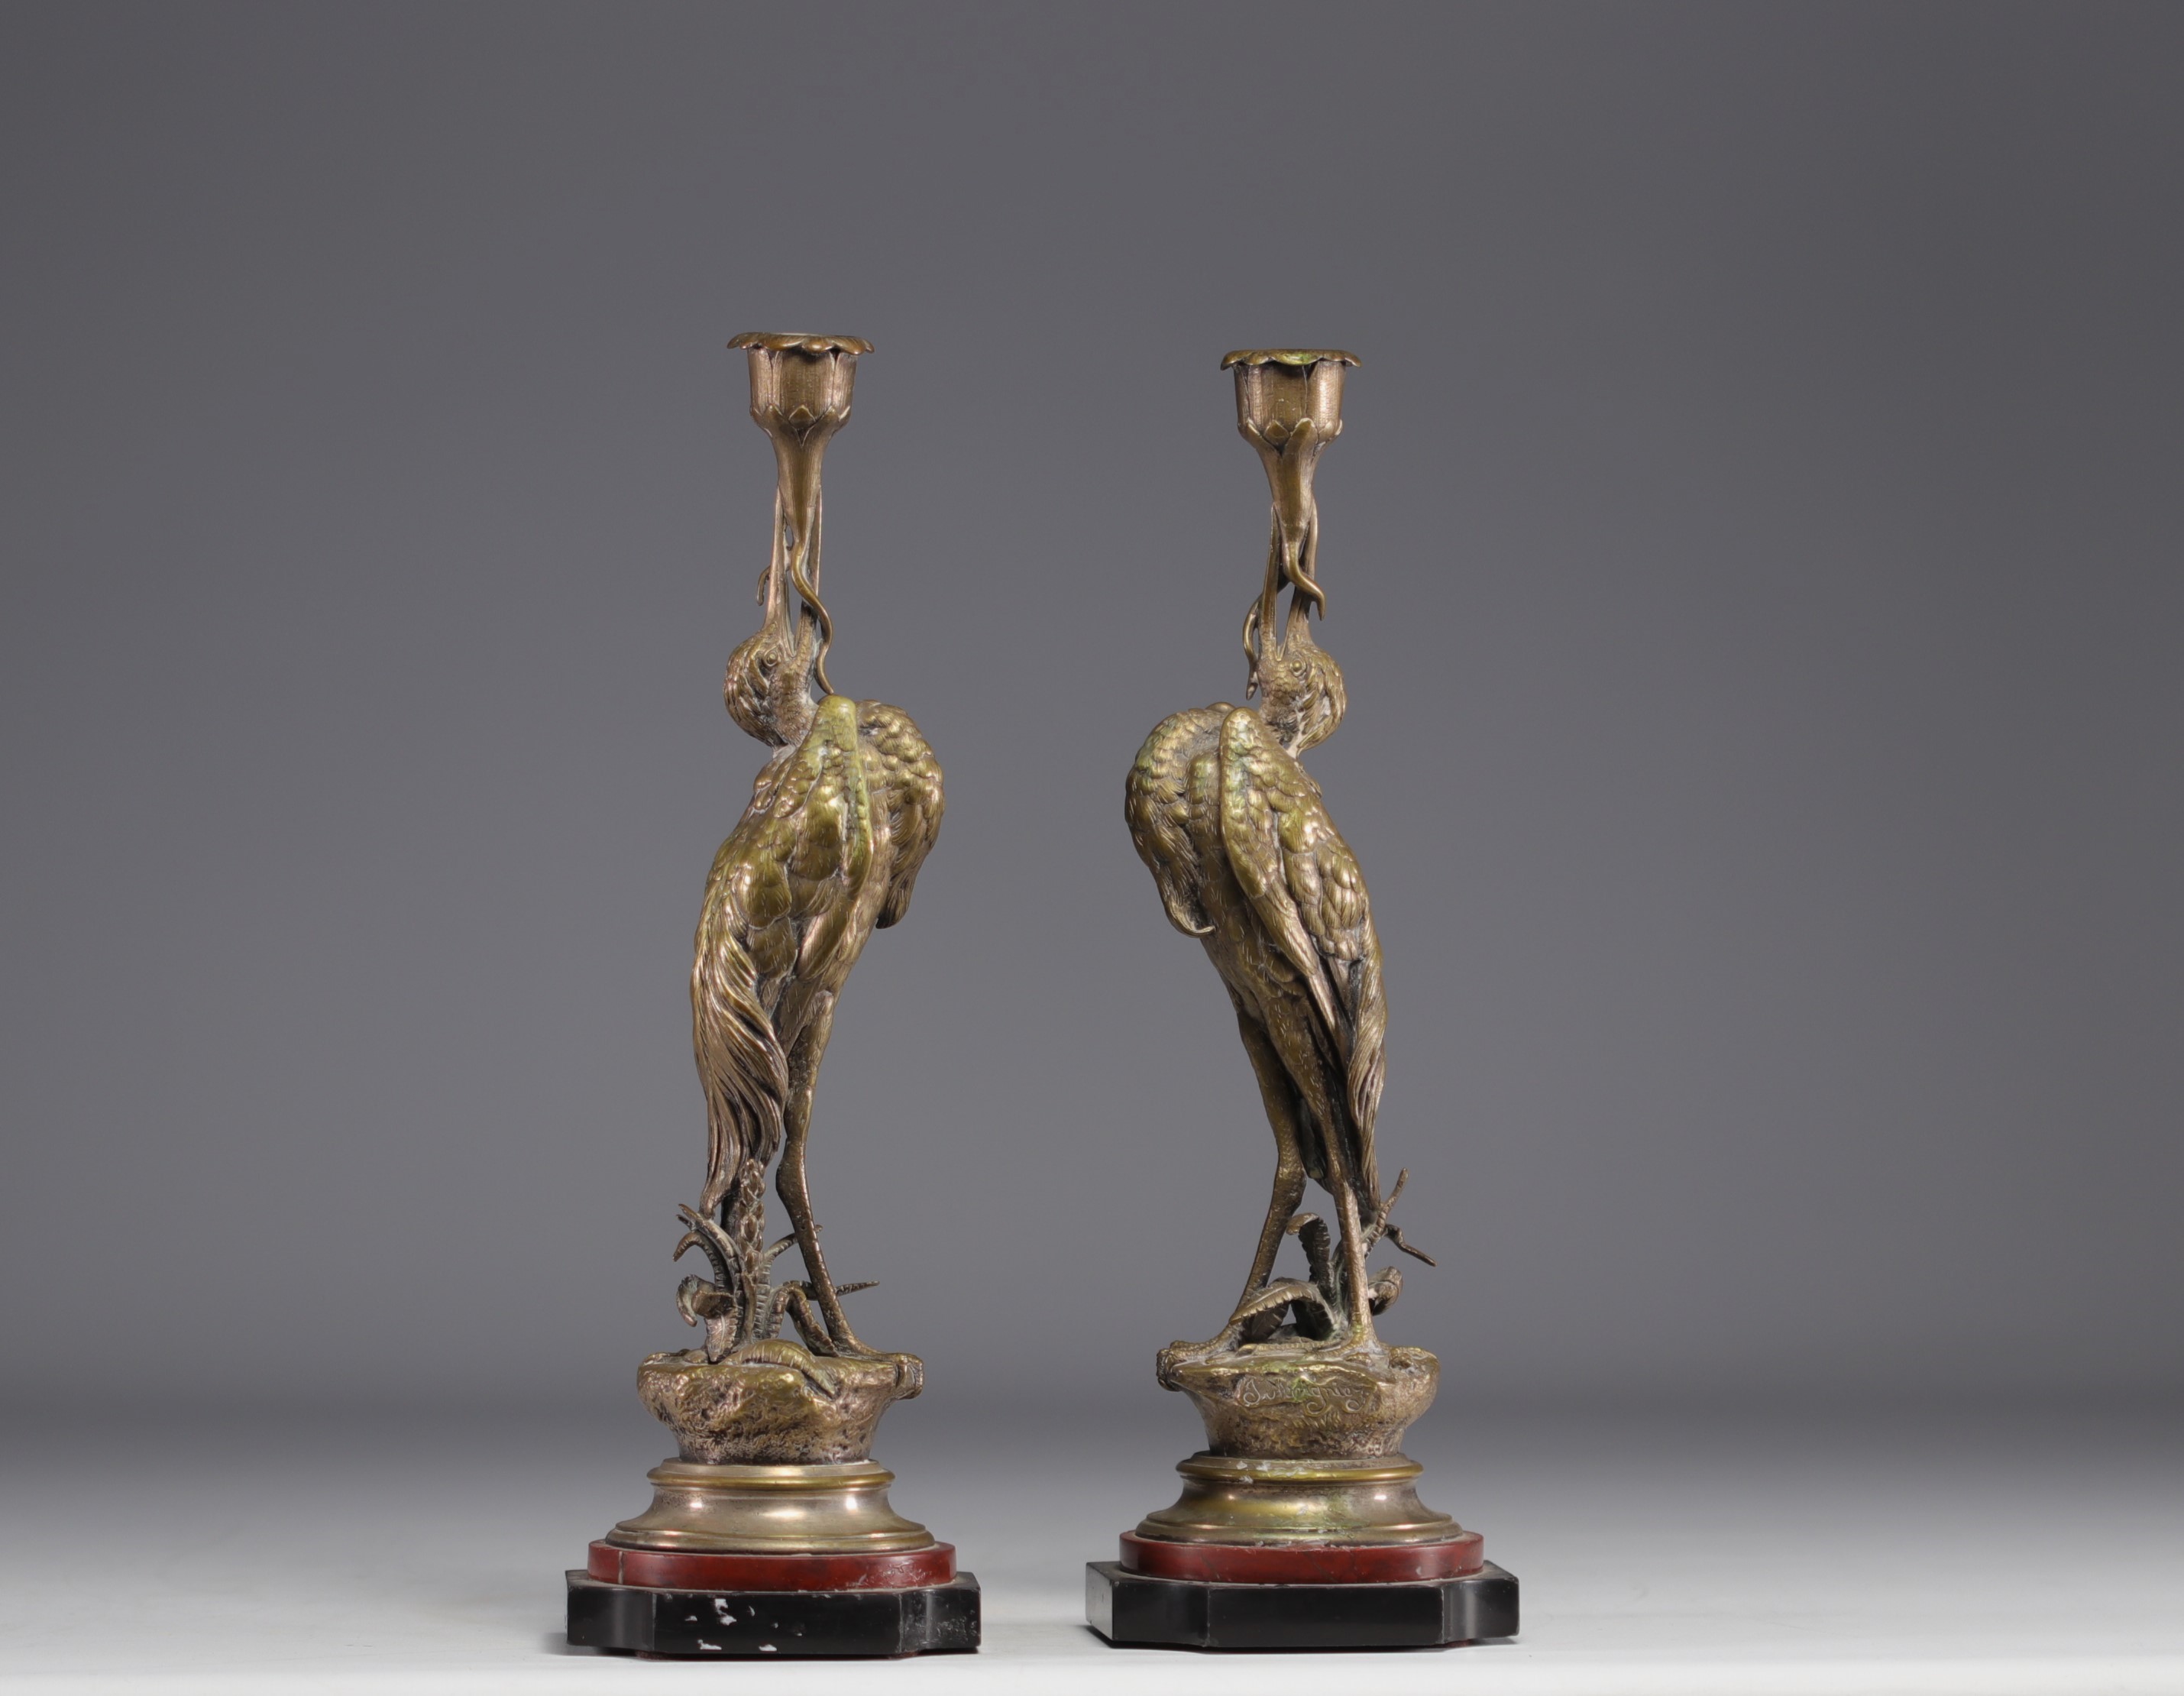 Jules MOIGNIEZ (1835-1894) "Les echassiers" Pair of bronze candlesticks. - Image 3 of 5